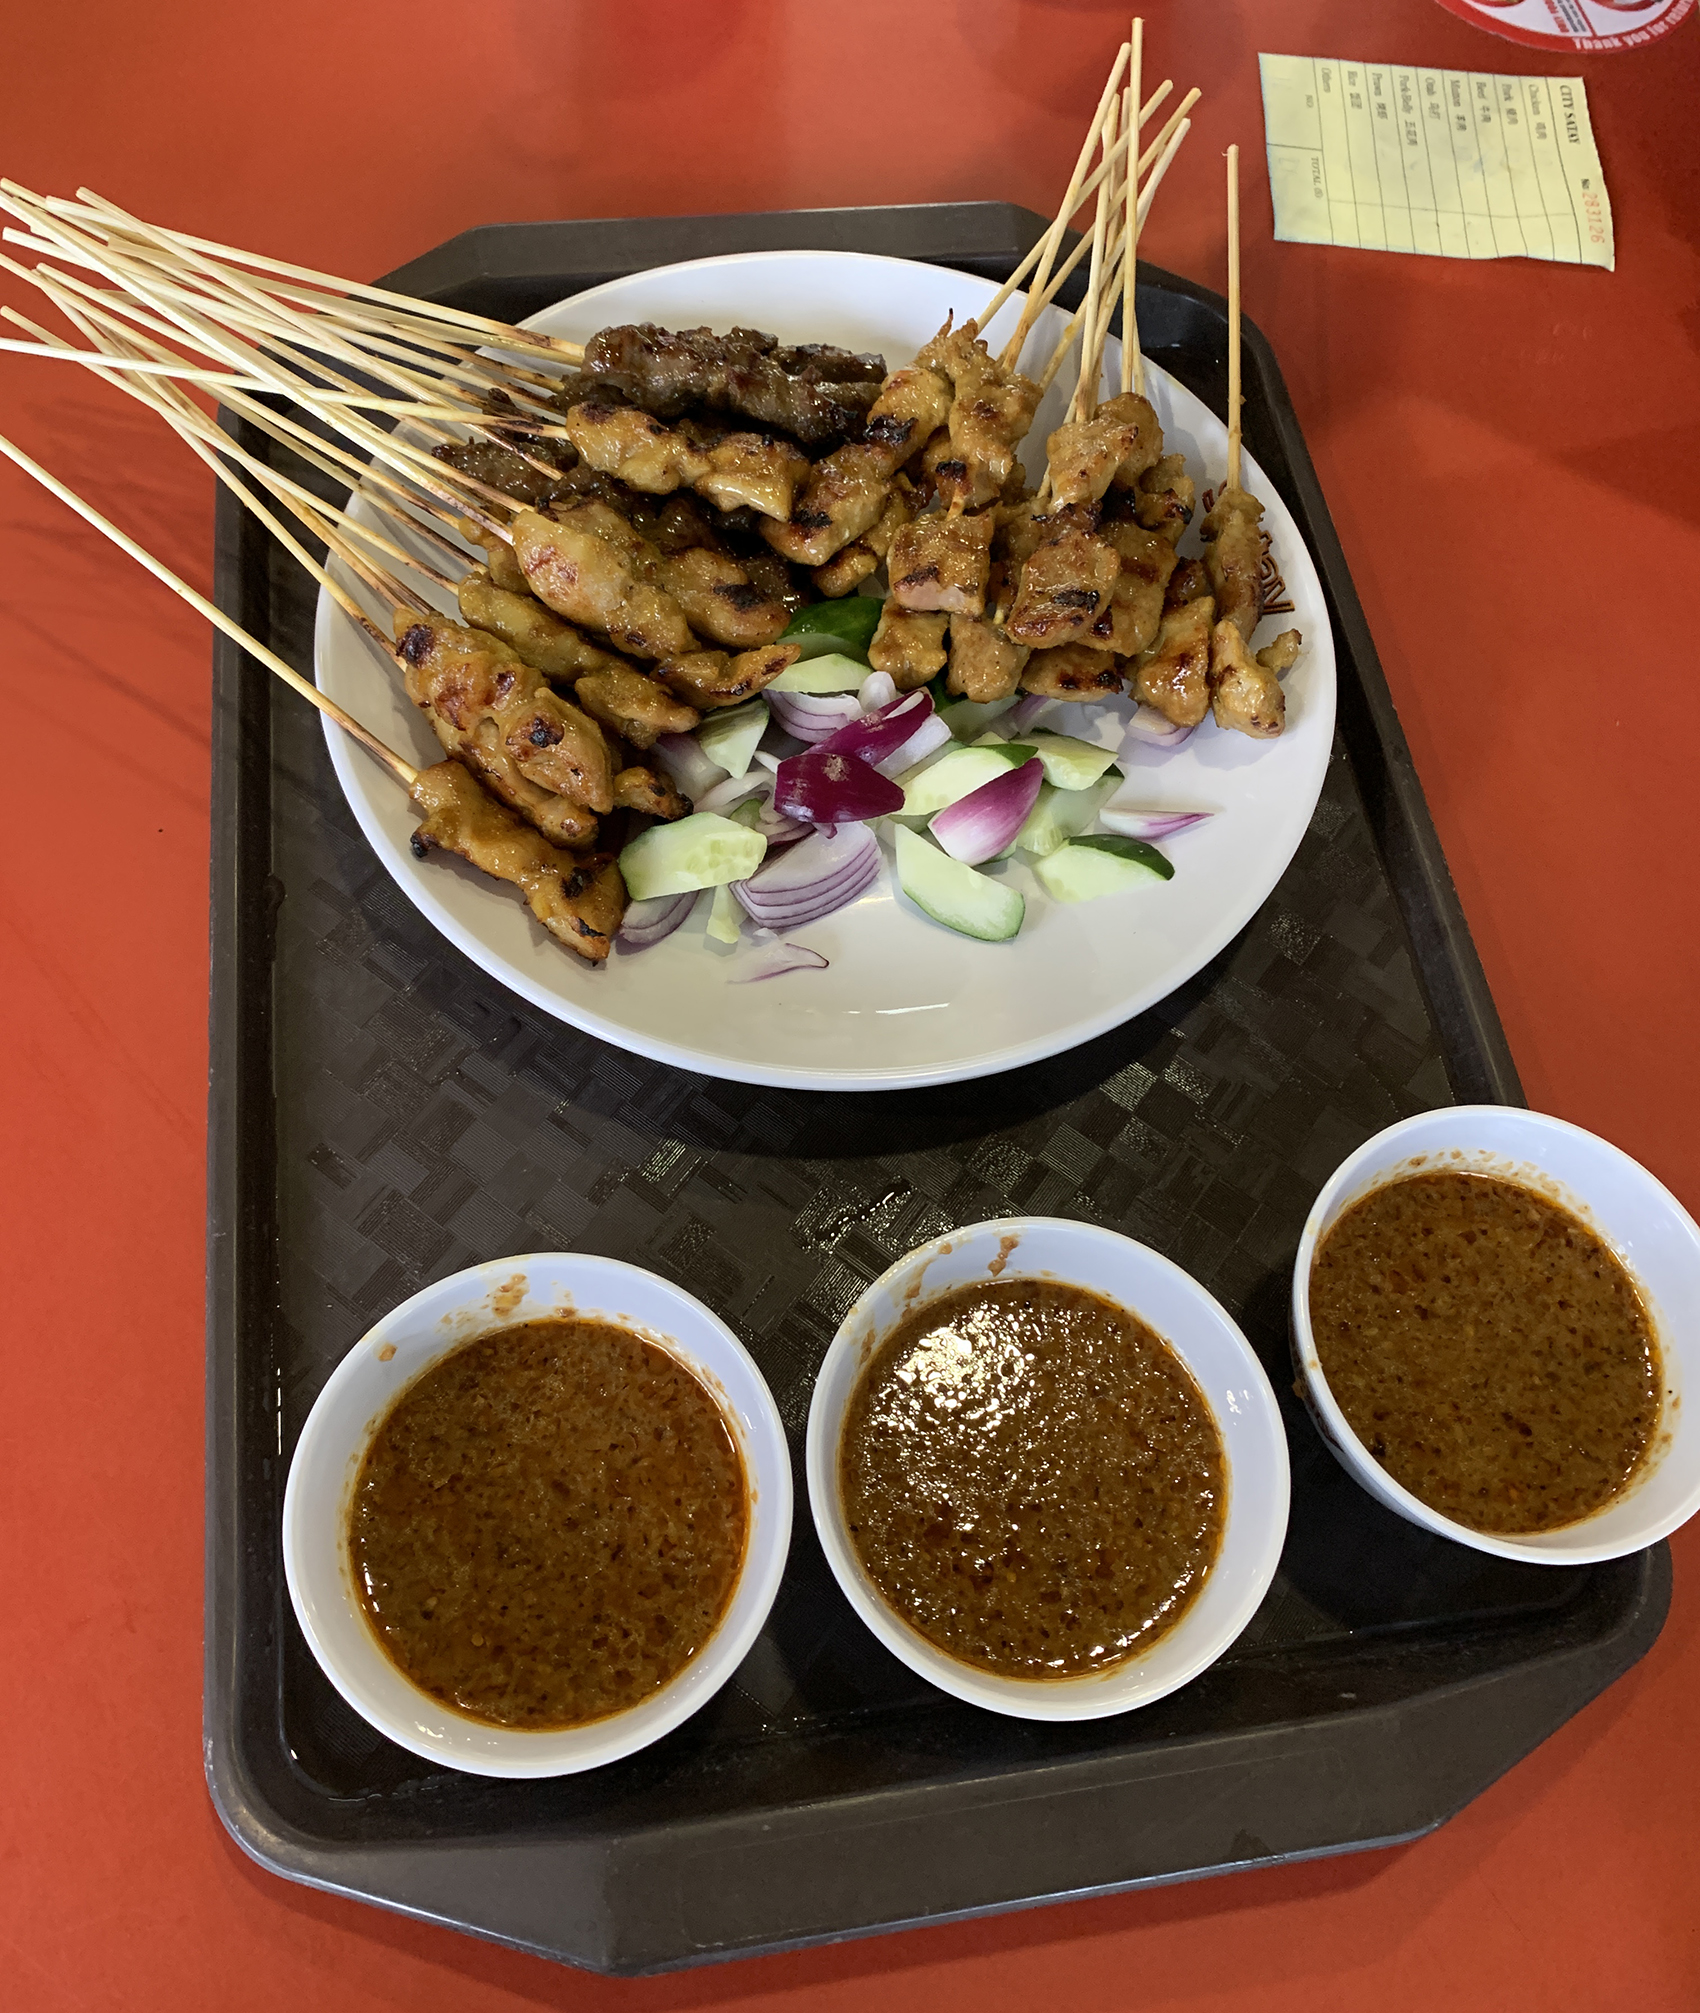 Image of street food in Singapore